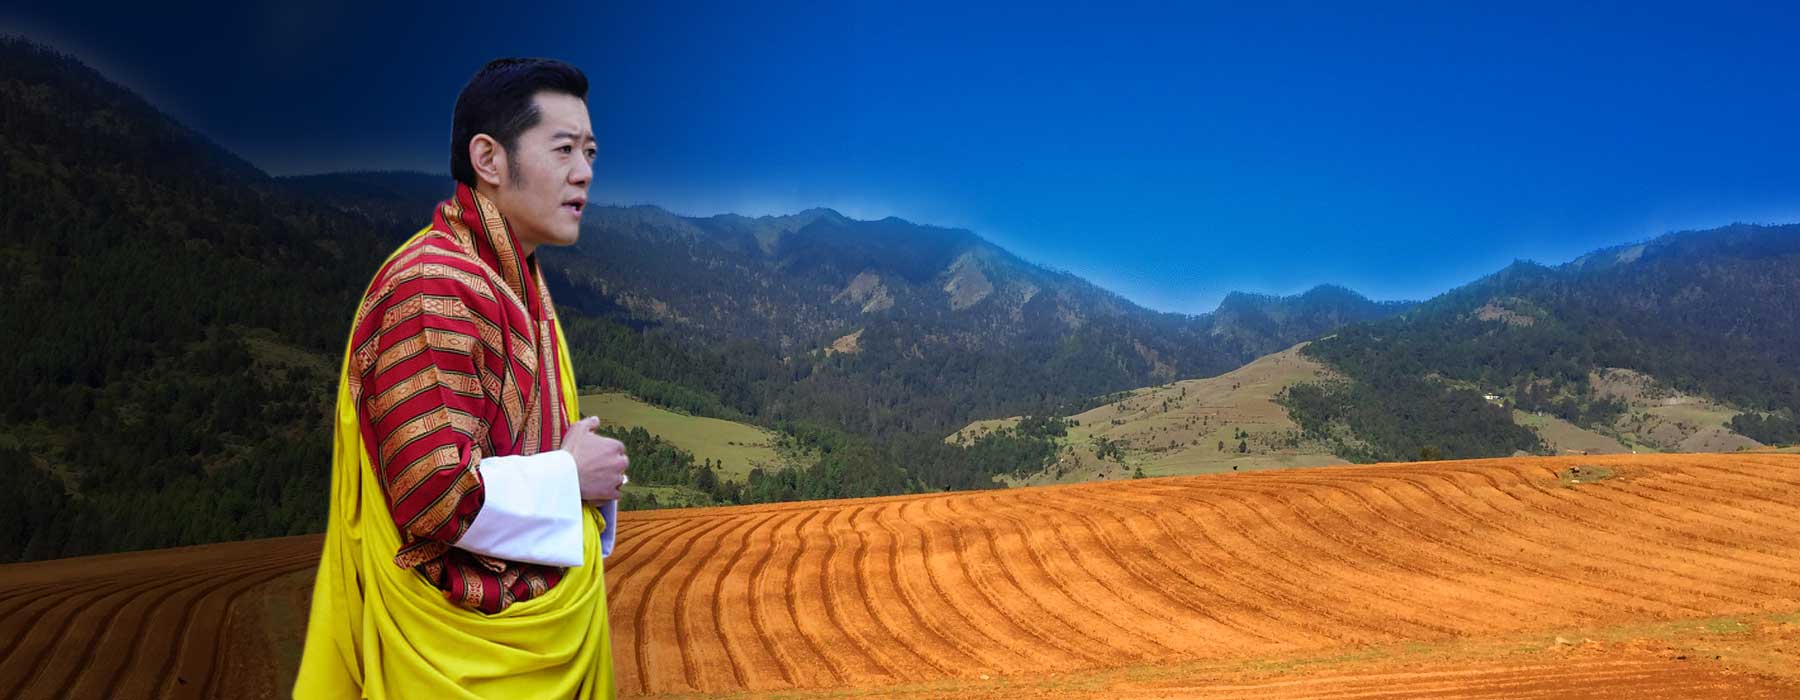 His Majesty The King of Bhutan